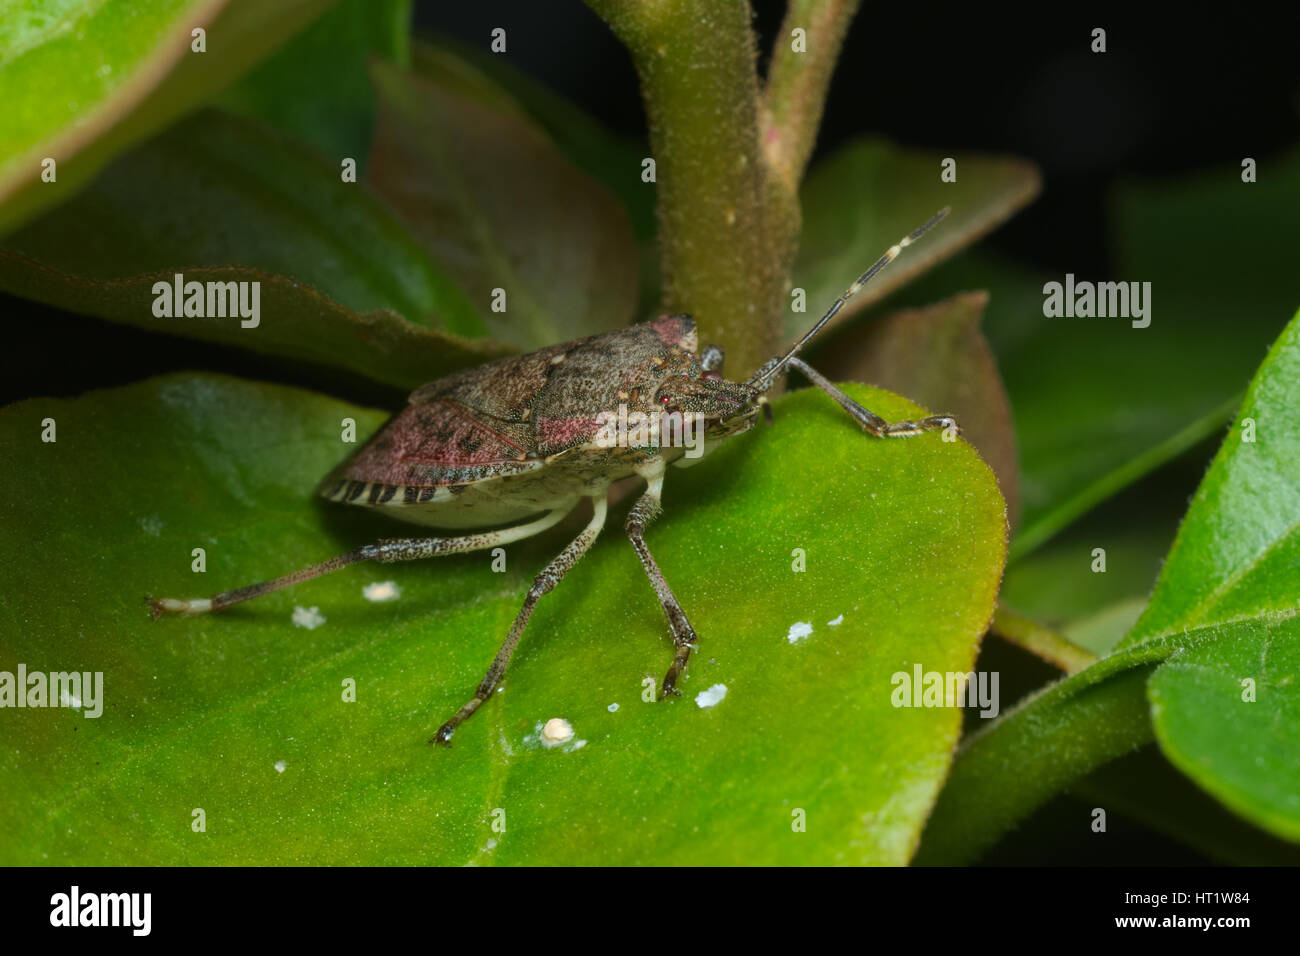 Brown marmorated stink bug (Halyomorpha halys) agricultural pest; italian cimice asiatica Stock Photo